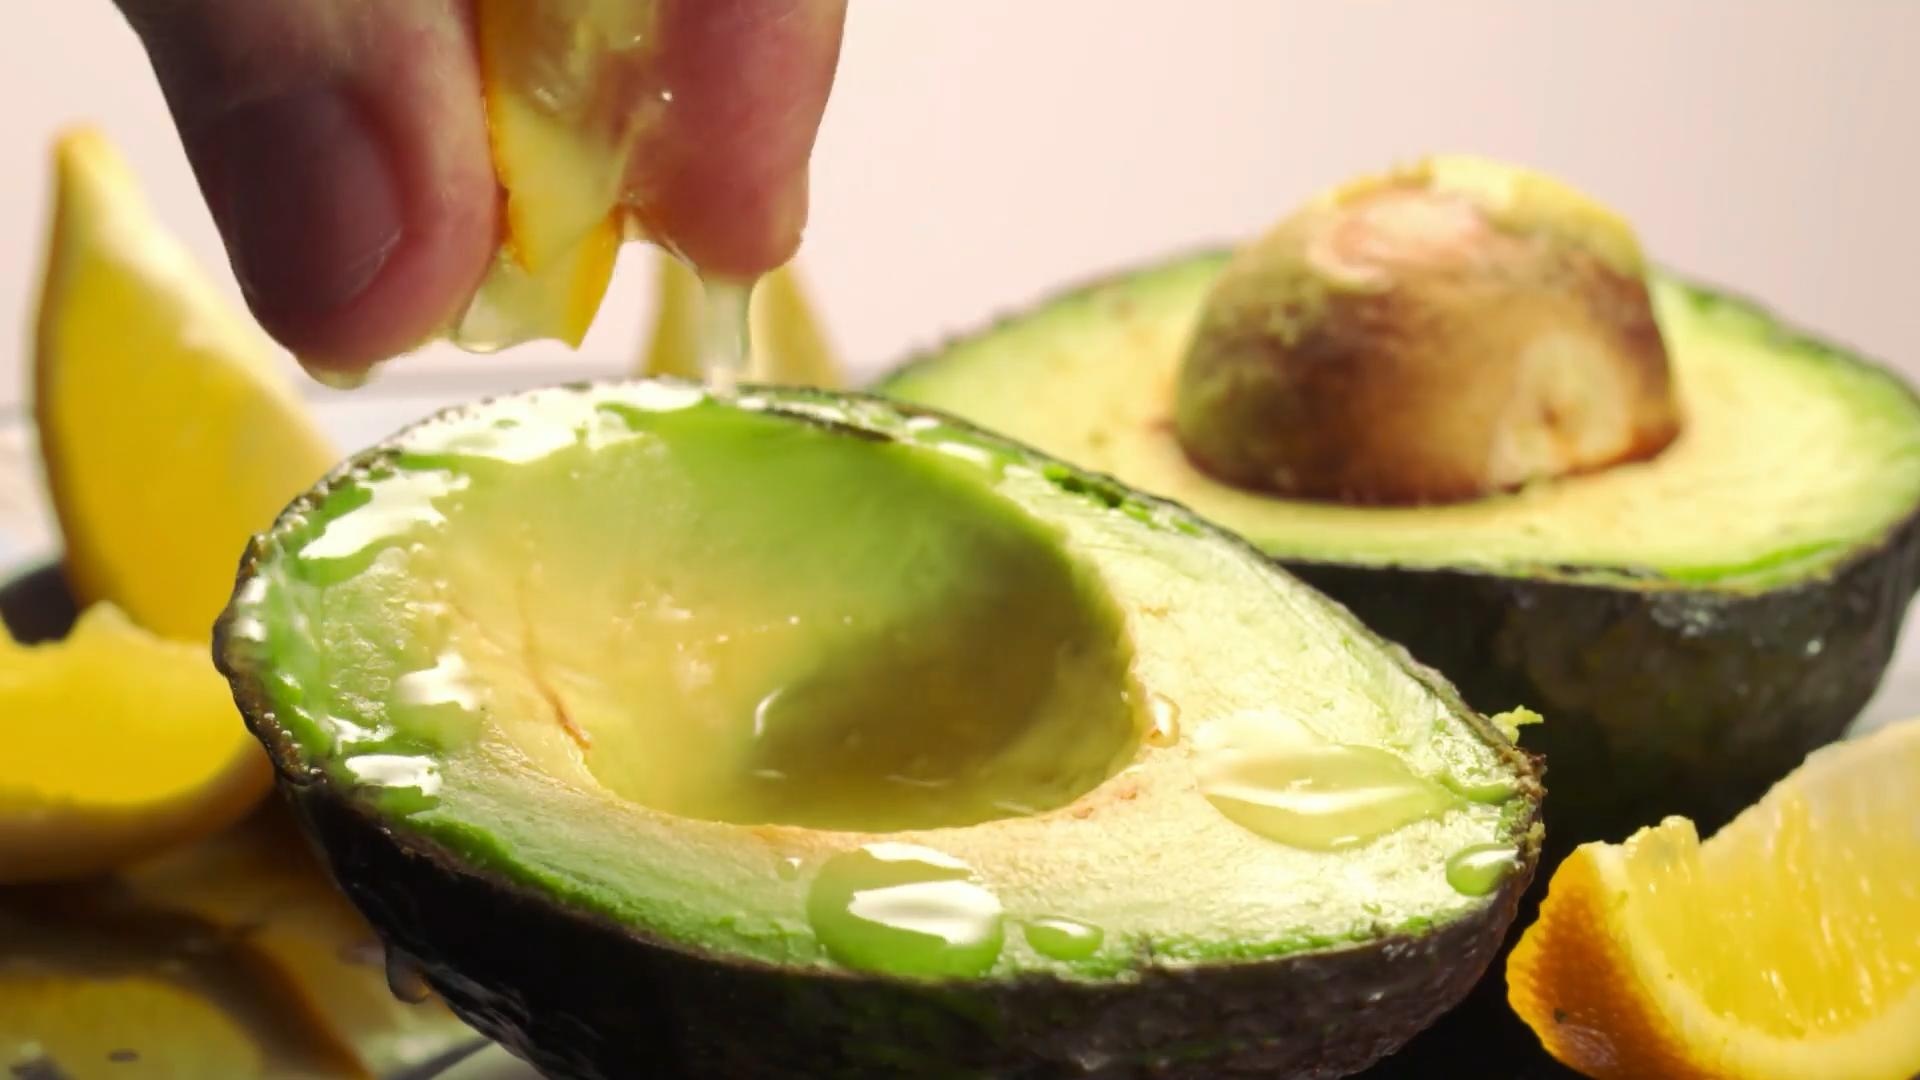 Avocado: Packed with fiber, Rich in potassium. 1920x1080 Full HD Wallpaper.